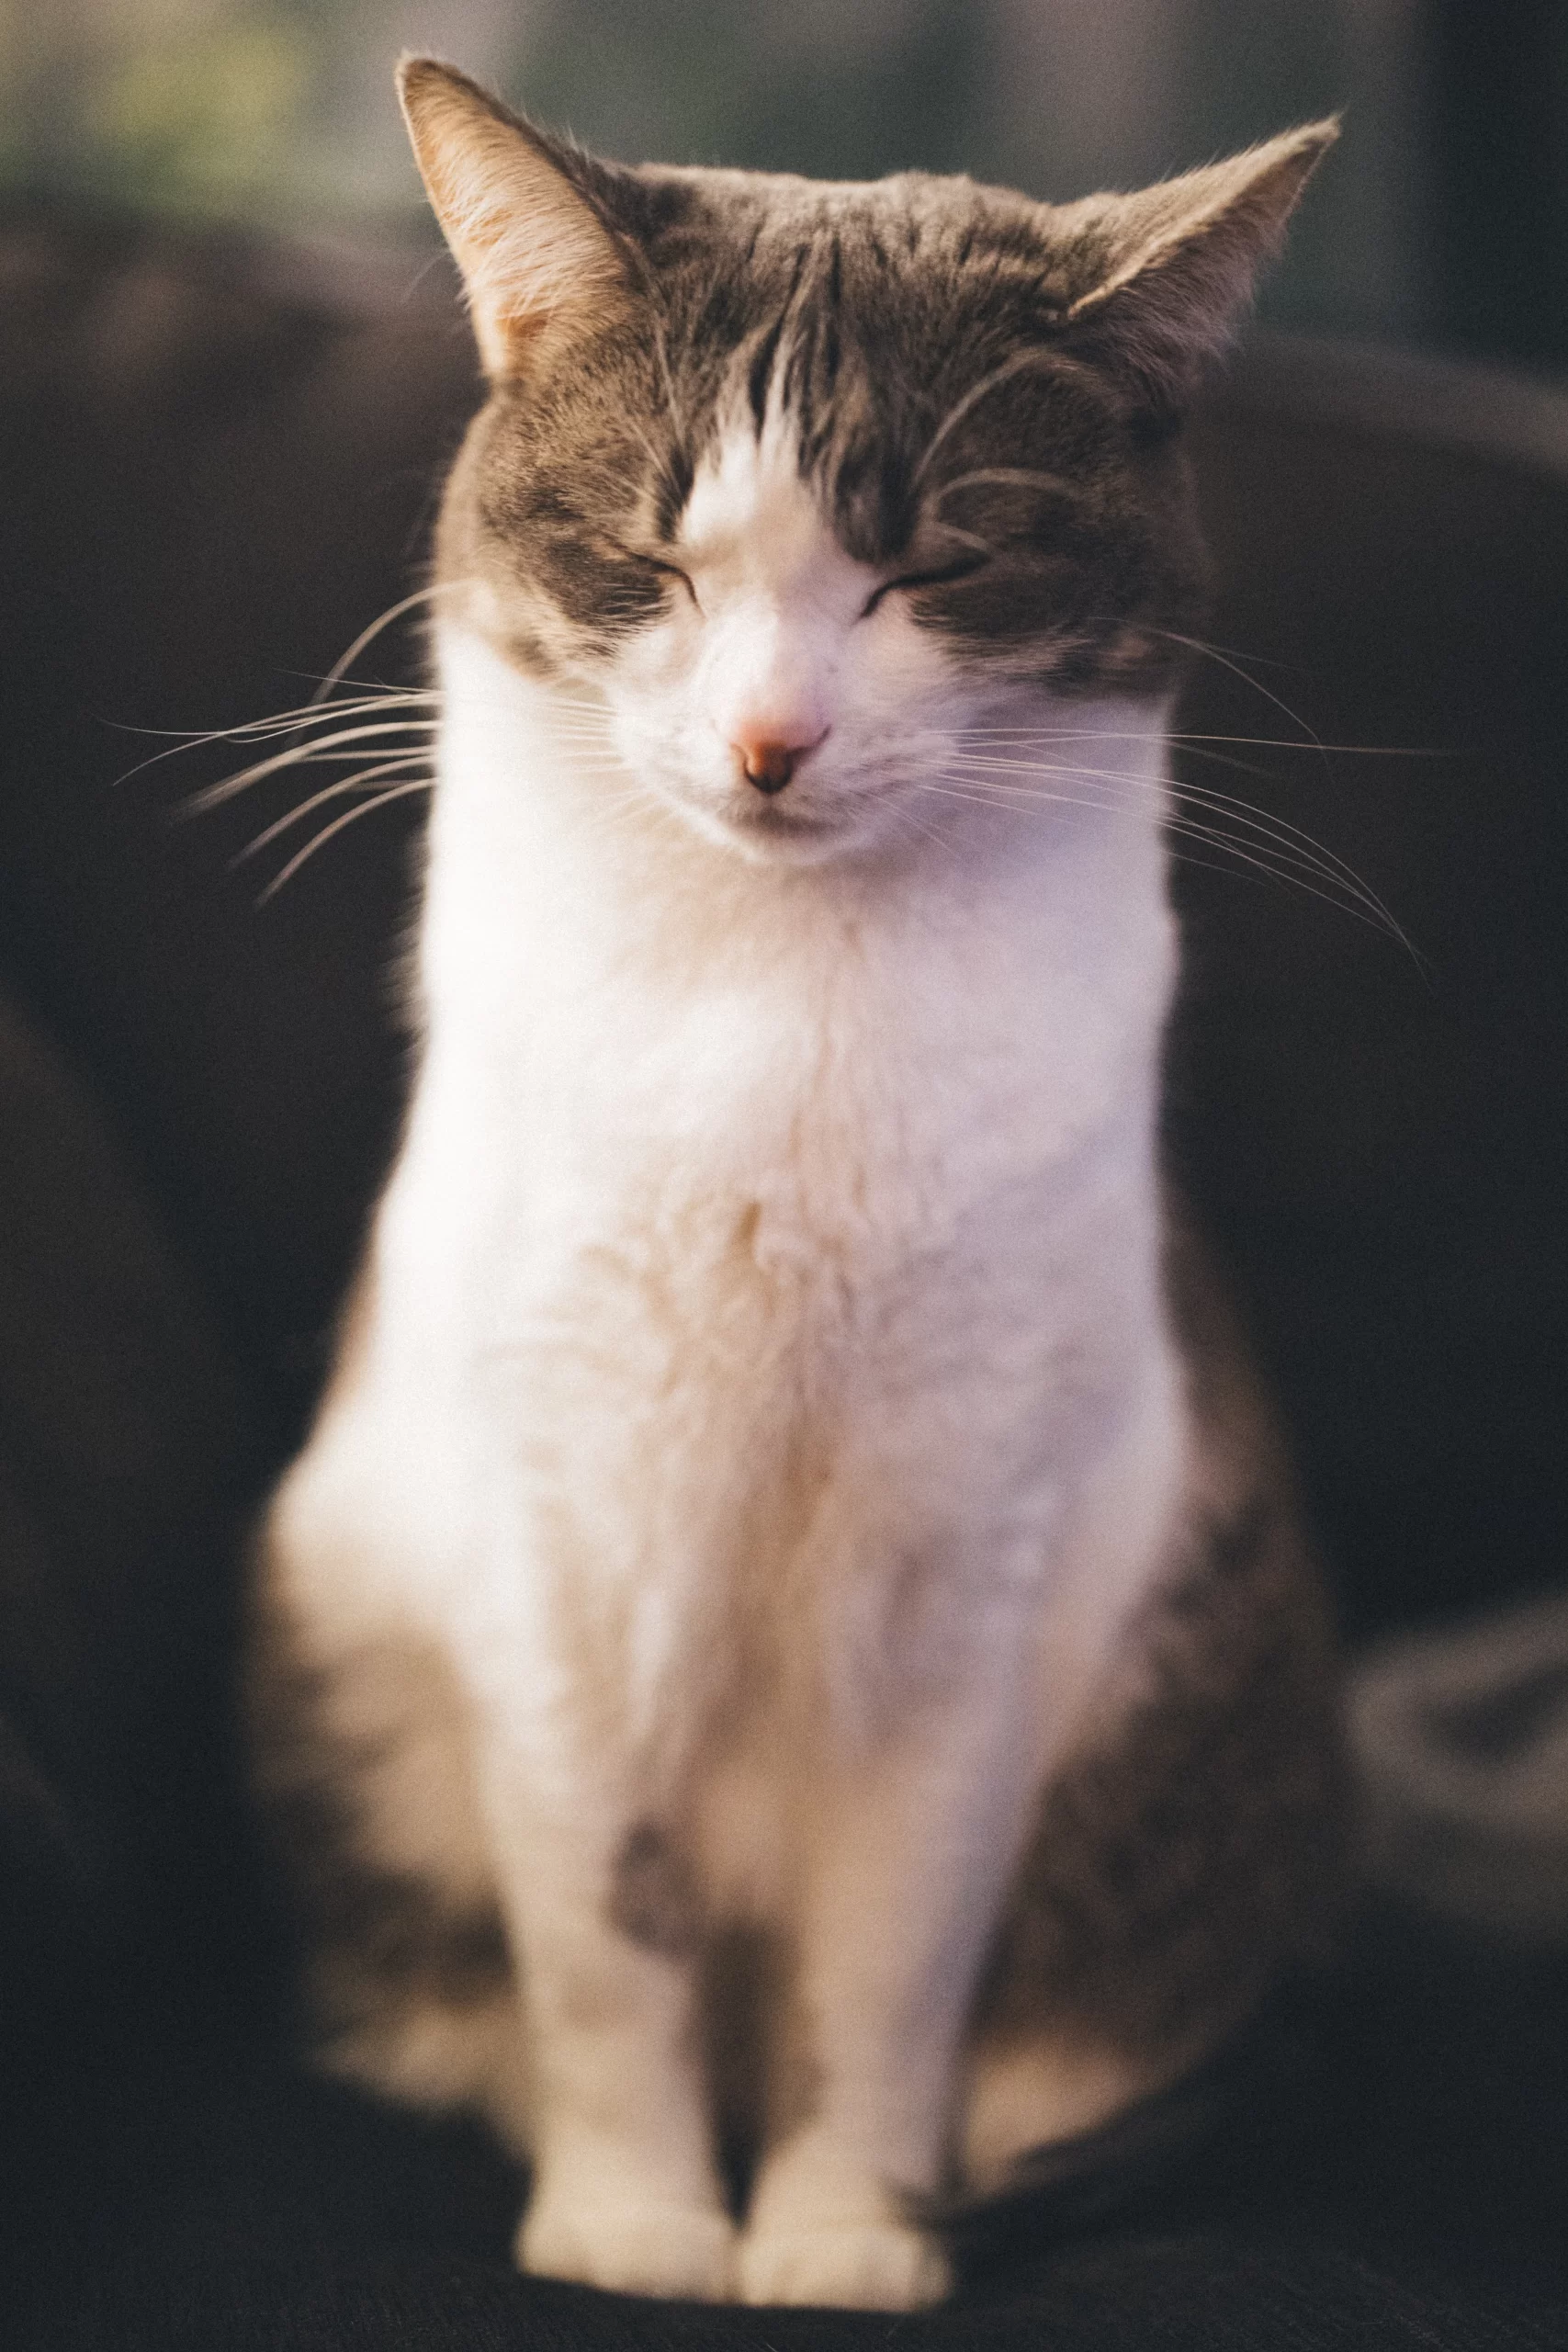 wes-hicks-cat with eyes squinting -unsplash (4)